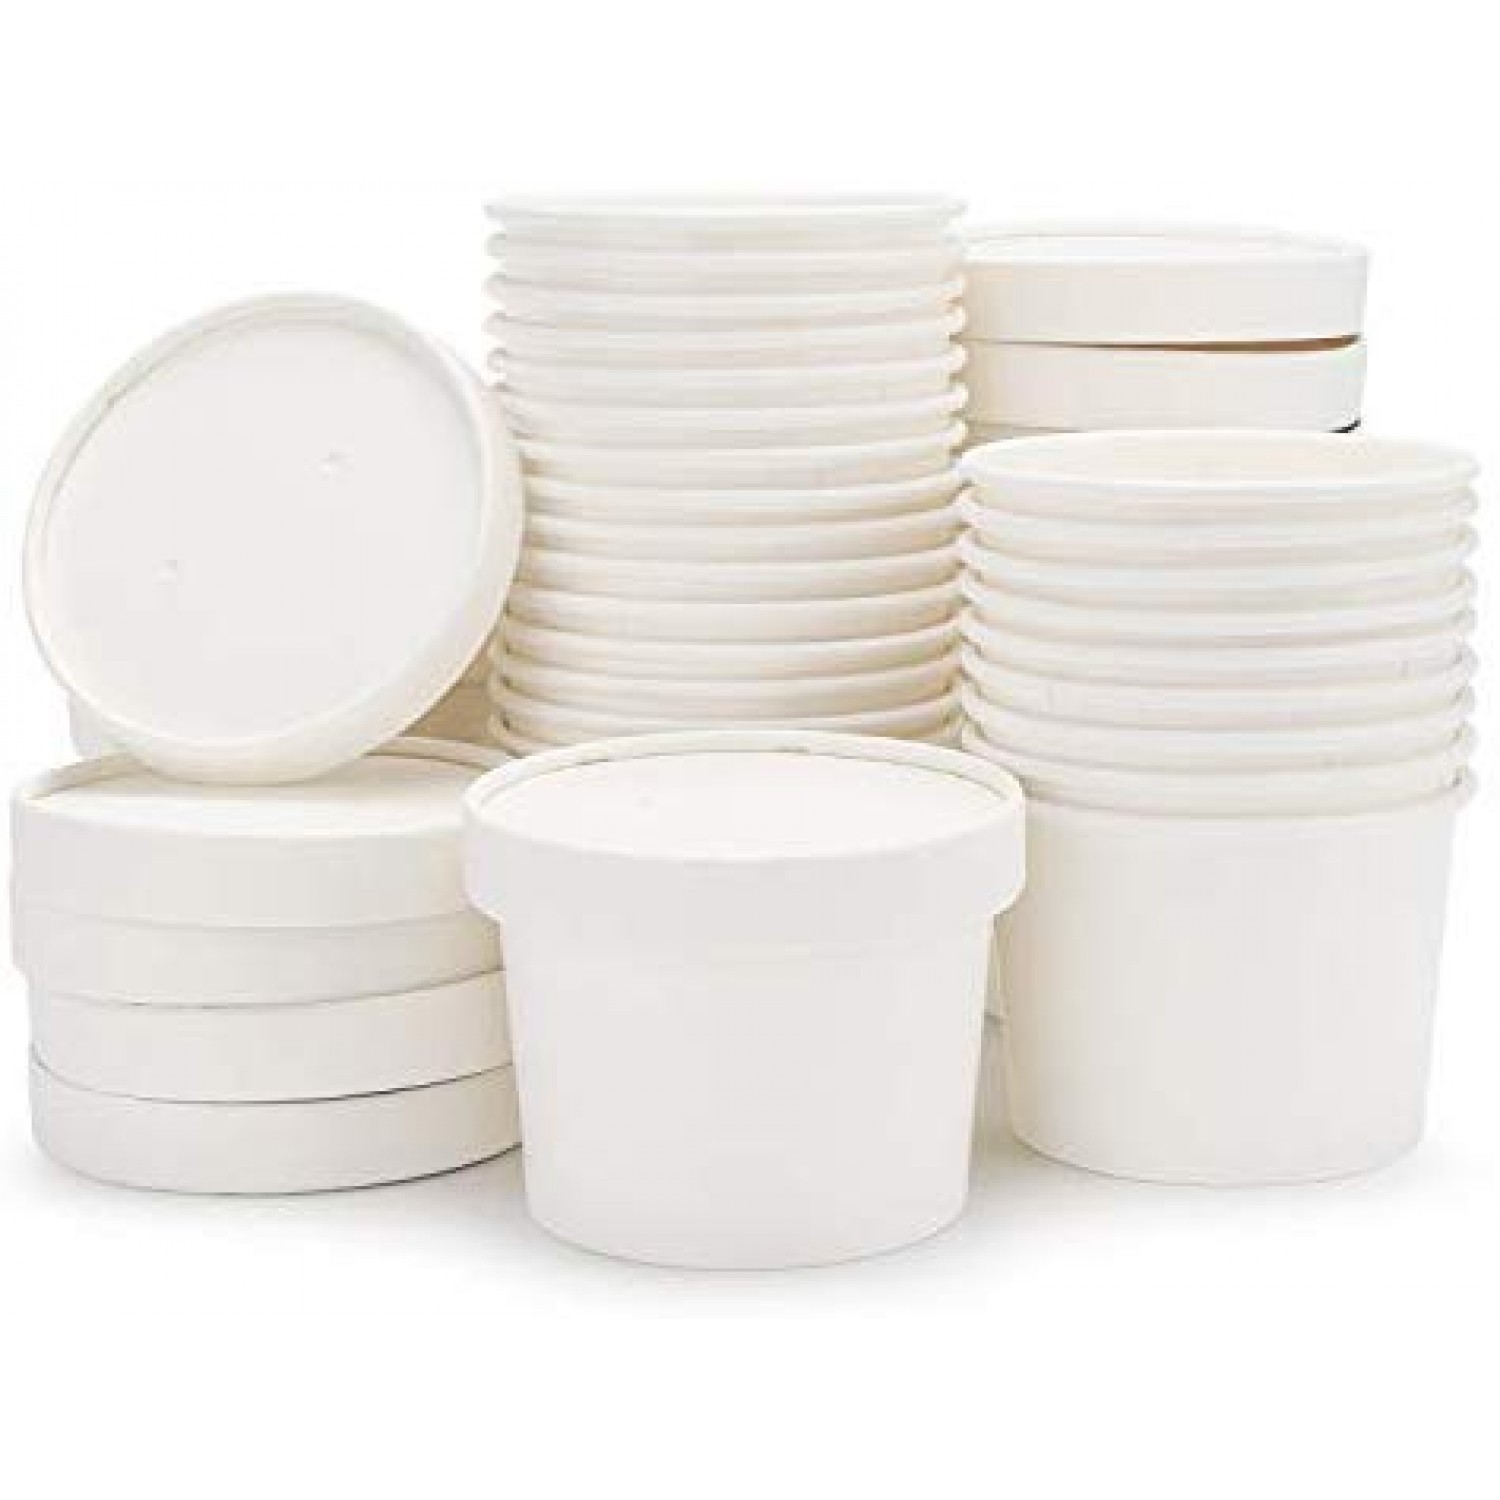 12 oz Ice Cream/Soup Containers w/Lids Included | 500 count